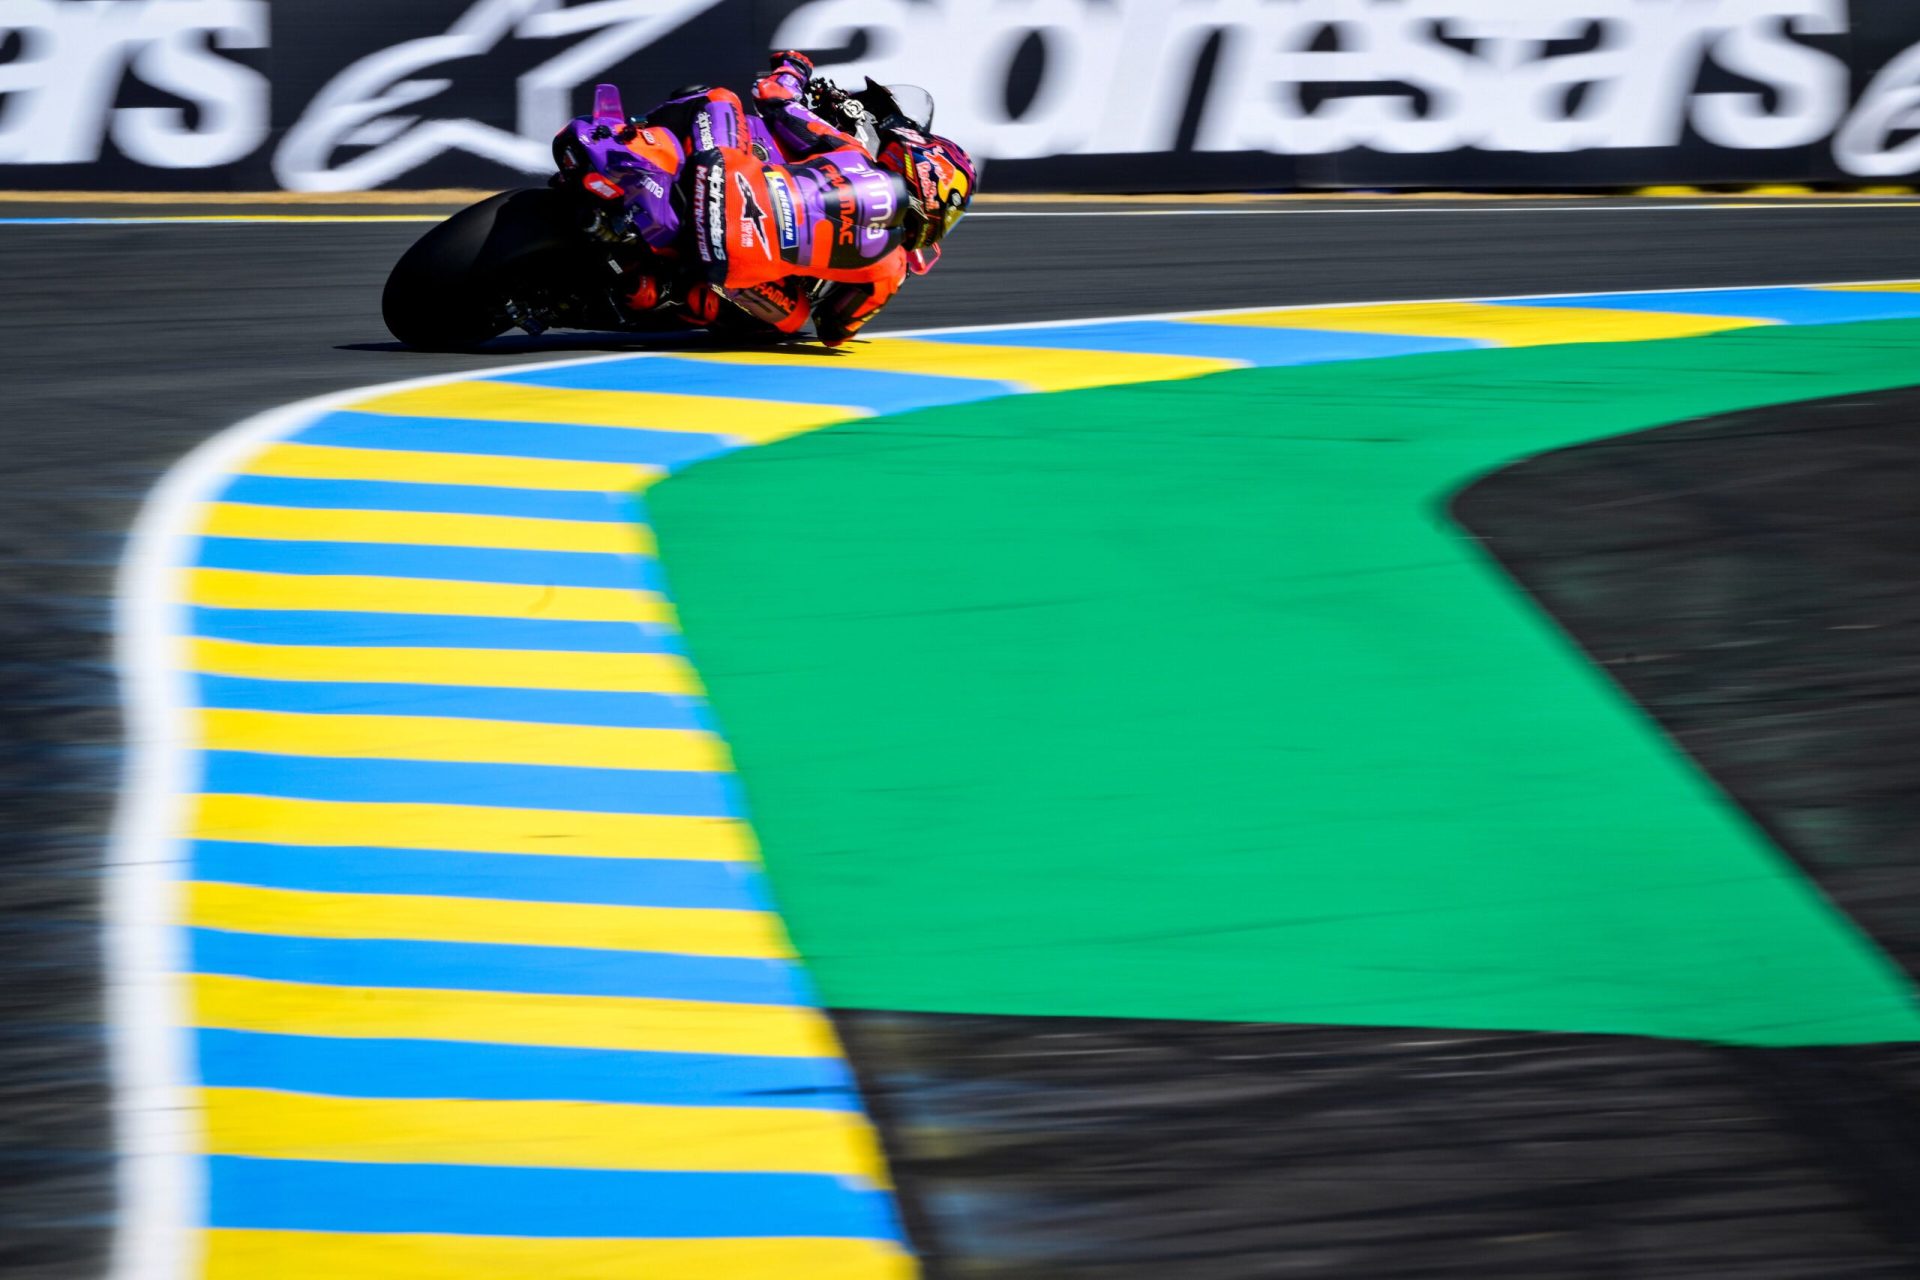 Martin Dominates French GP Practice as Marquez Falters: A Racing Spectacle Unfolds